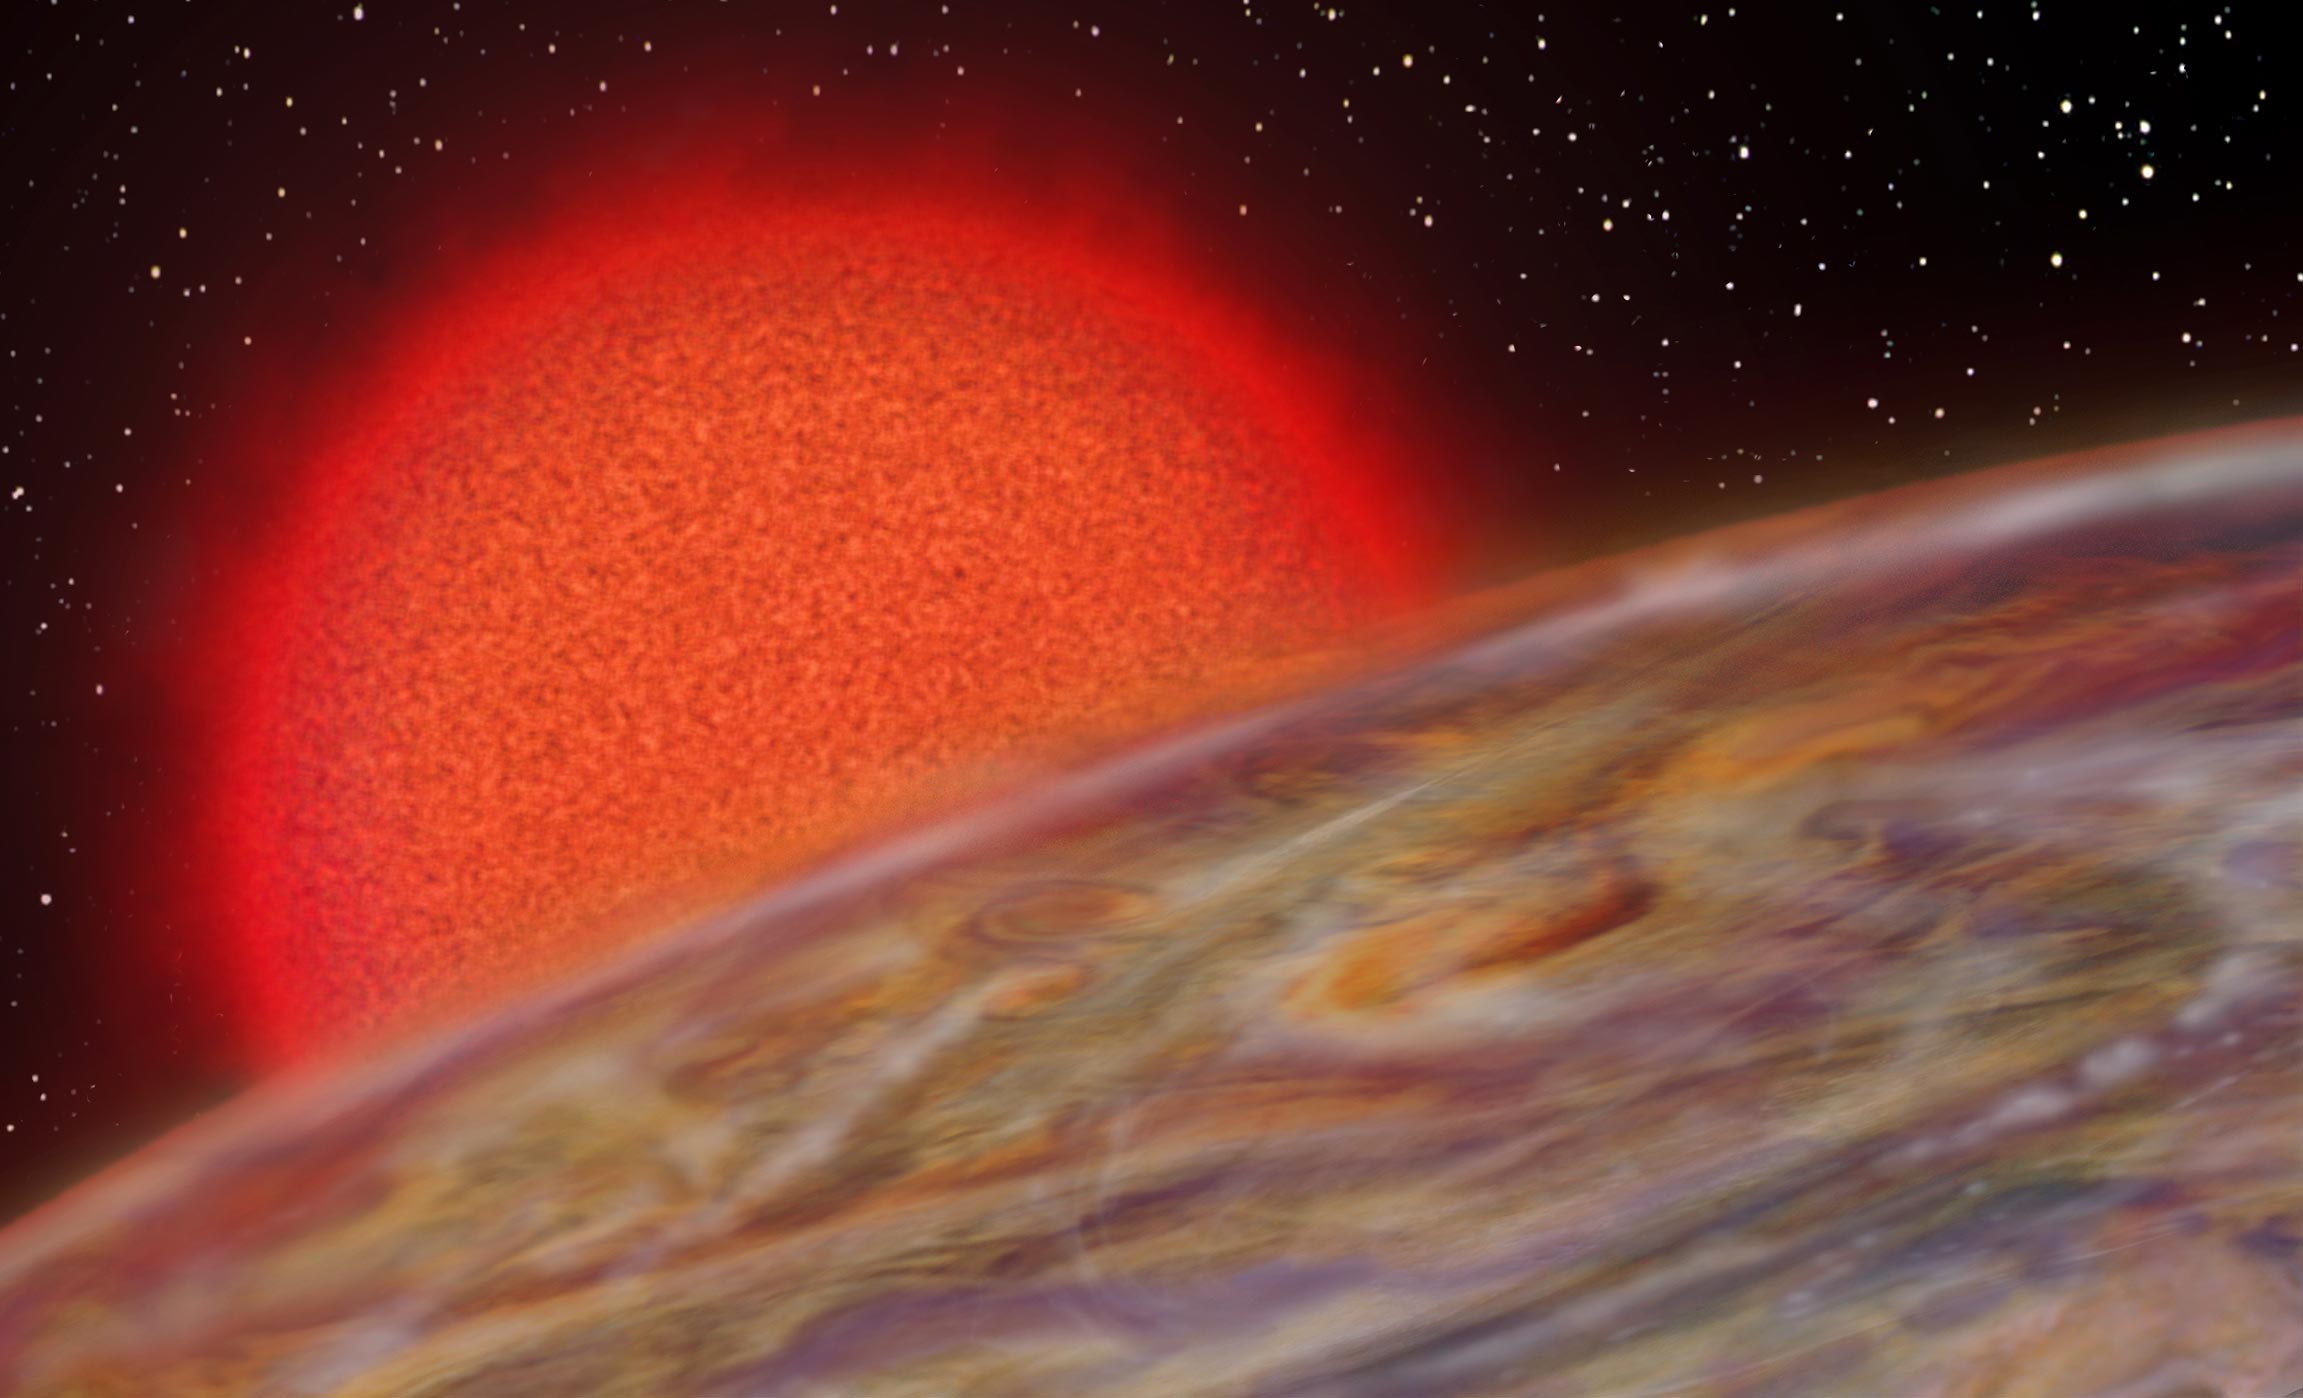 On the Edge of Destruction: These Newly-Discovered Planets Are Doomed - SciTechDaily